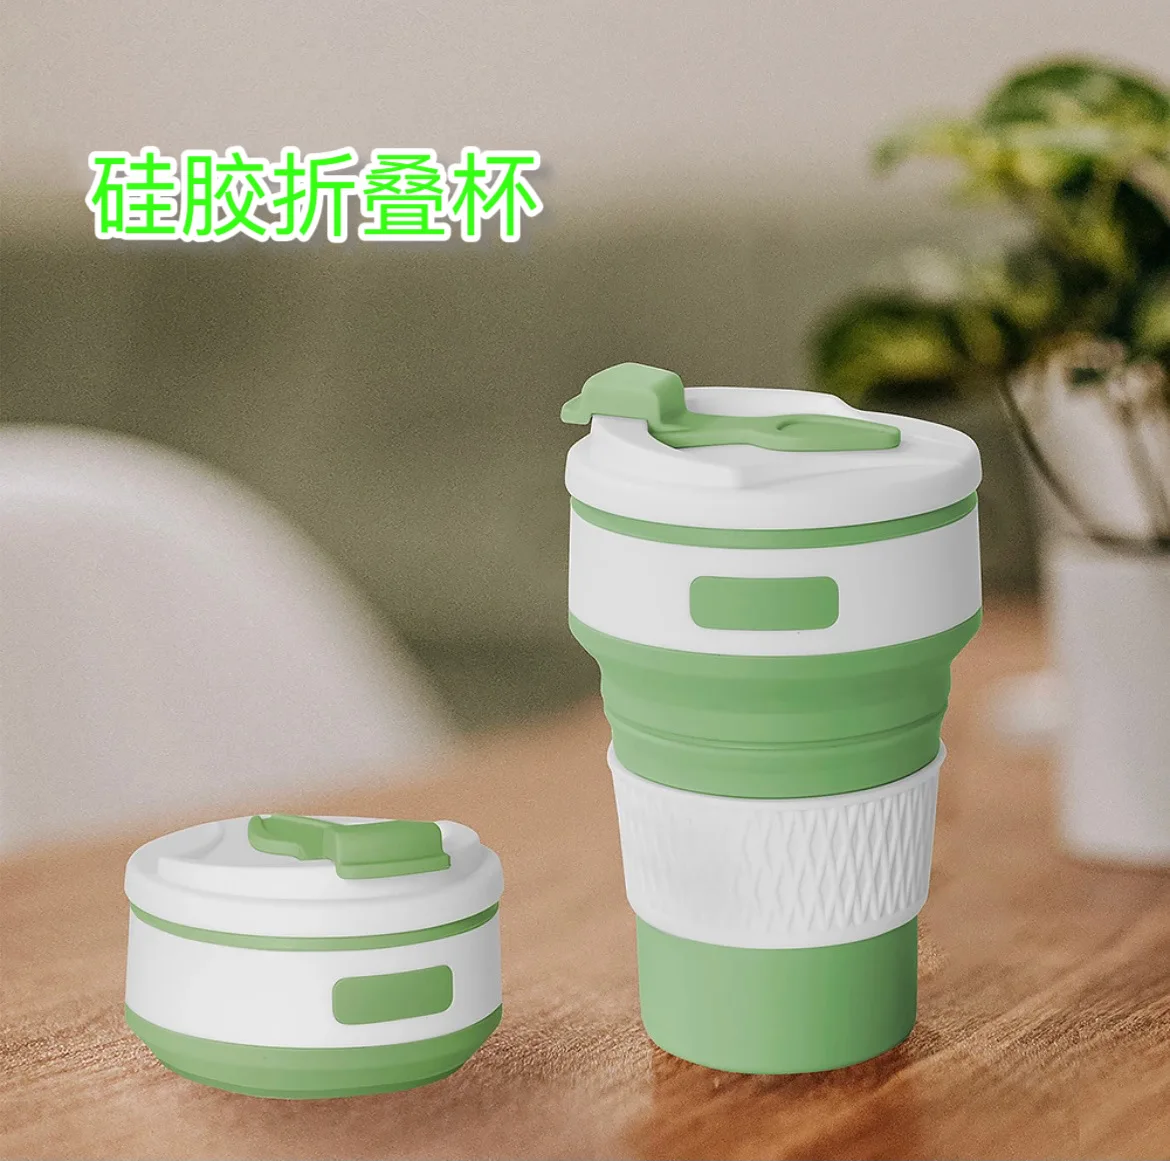 

Folding Silicone Cup Portable Silicone Telescopic Drinking Collapsible Coffee Cup Multi-function Foldable Silica Mug Travel